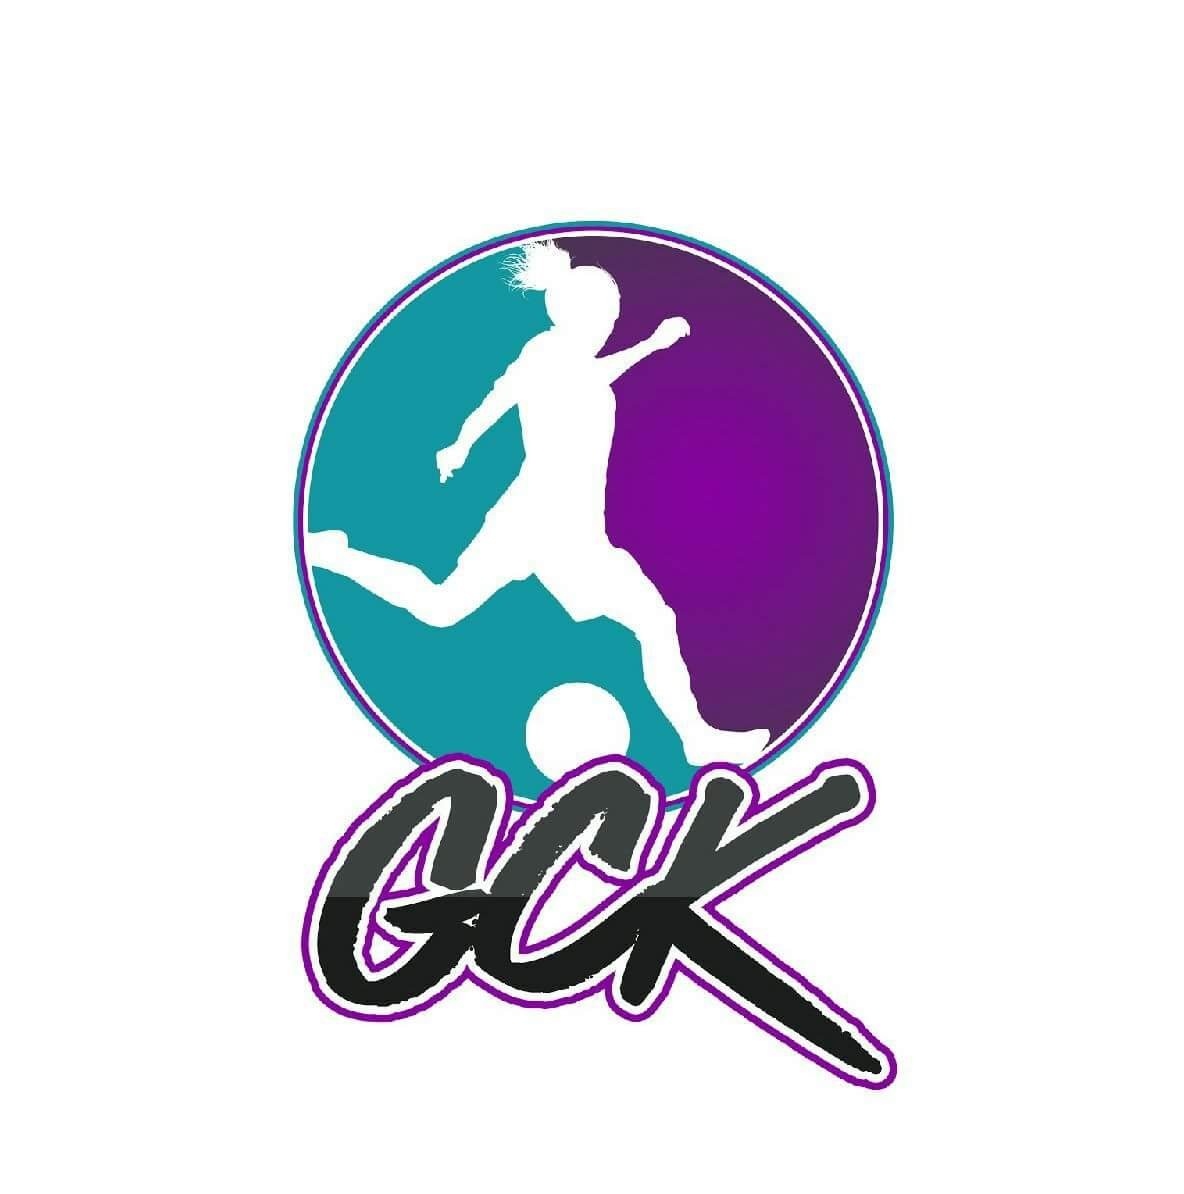 Gwinnett County Kickers, LLC is a recreational sports organization dedicated to bringing communities together.